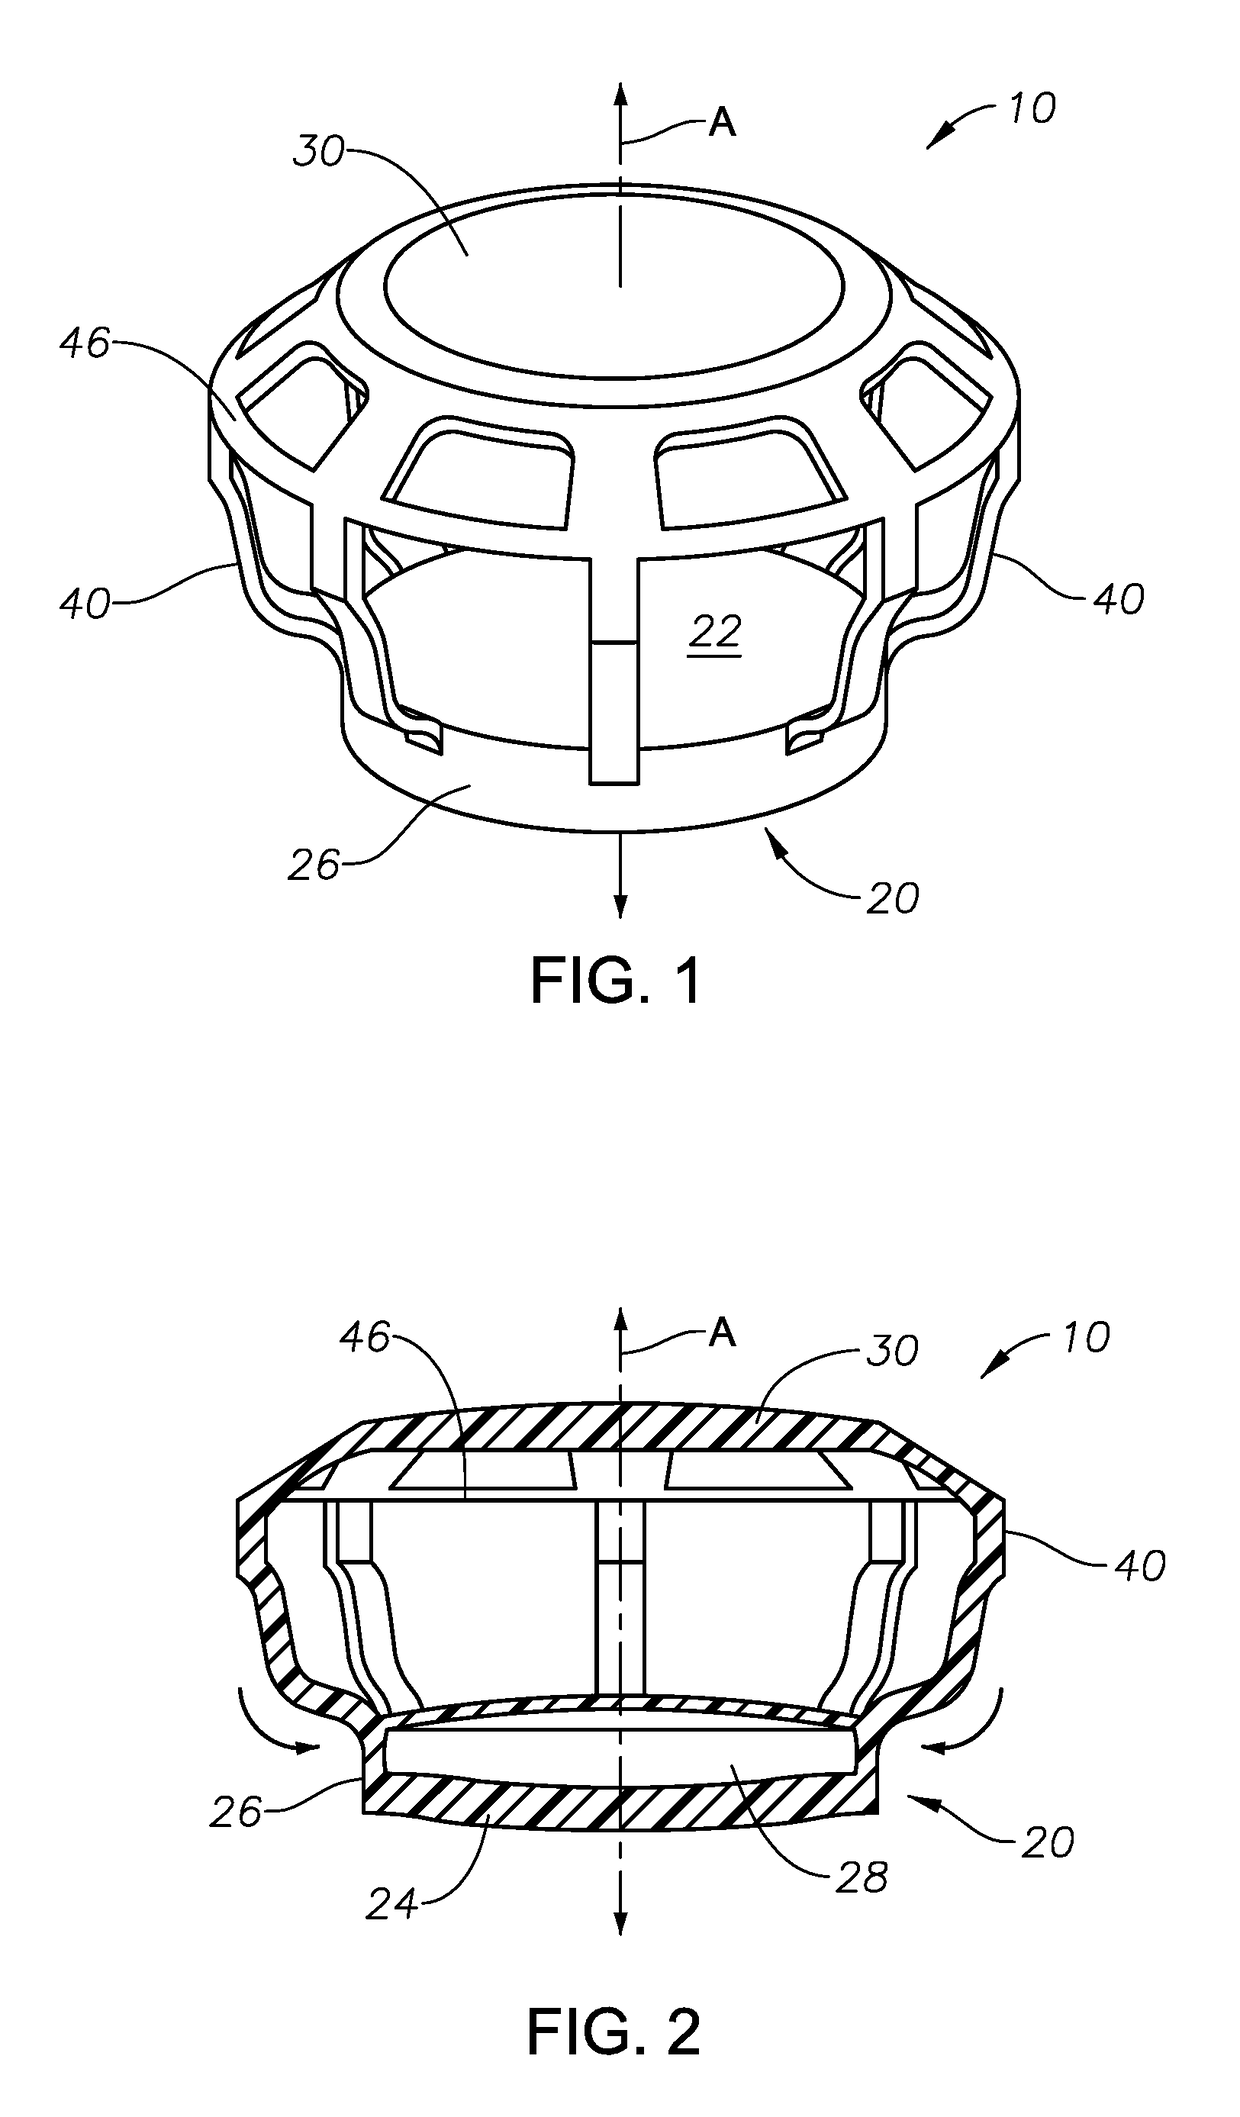 Dual optic, curvature changing accommodative IOL having a fixed disaccommodated refractive state